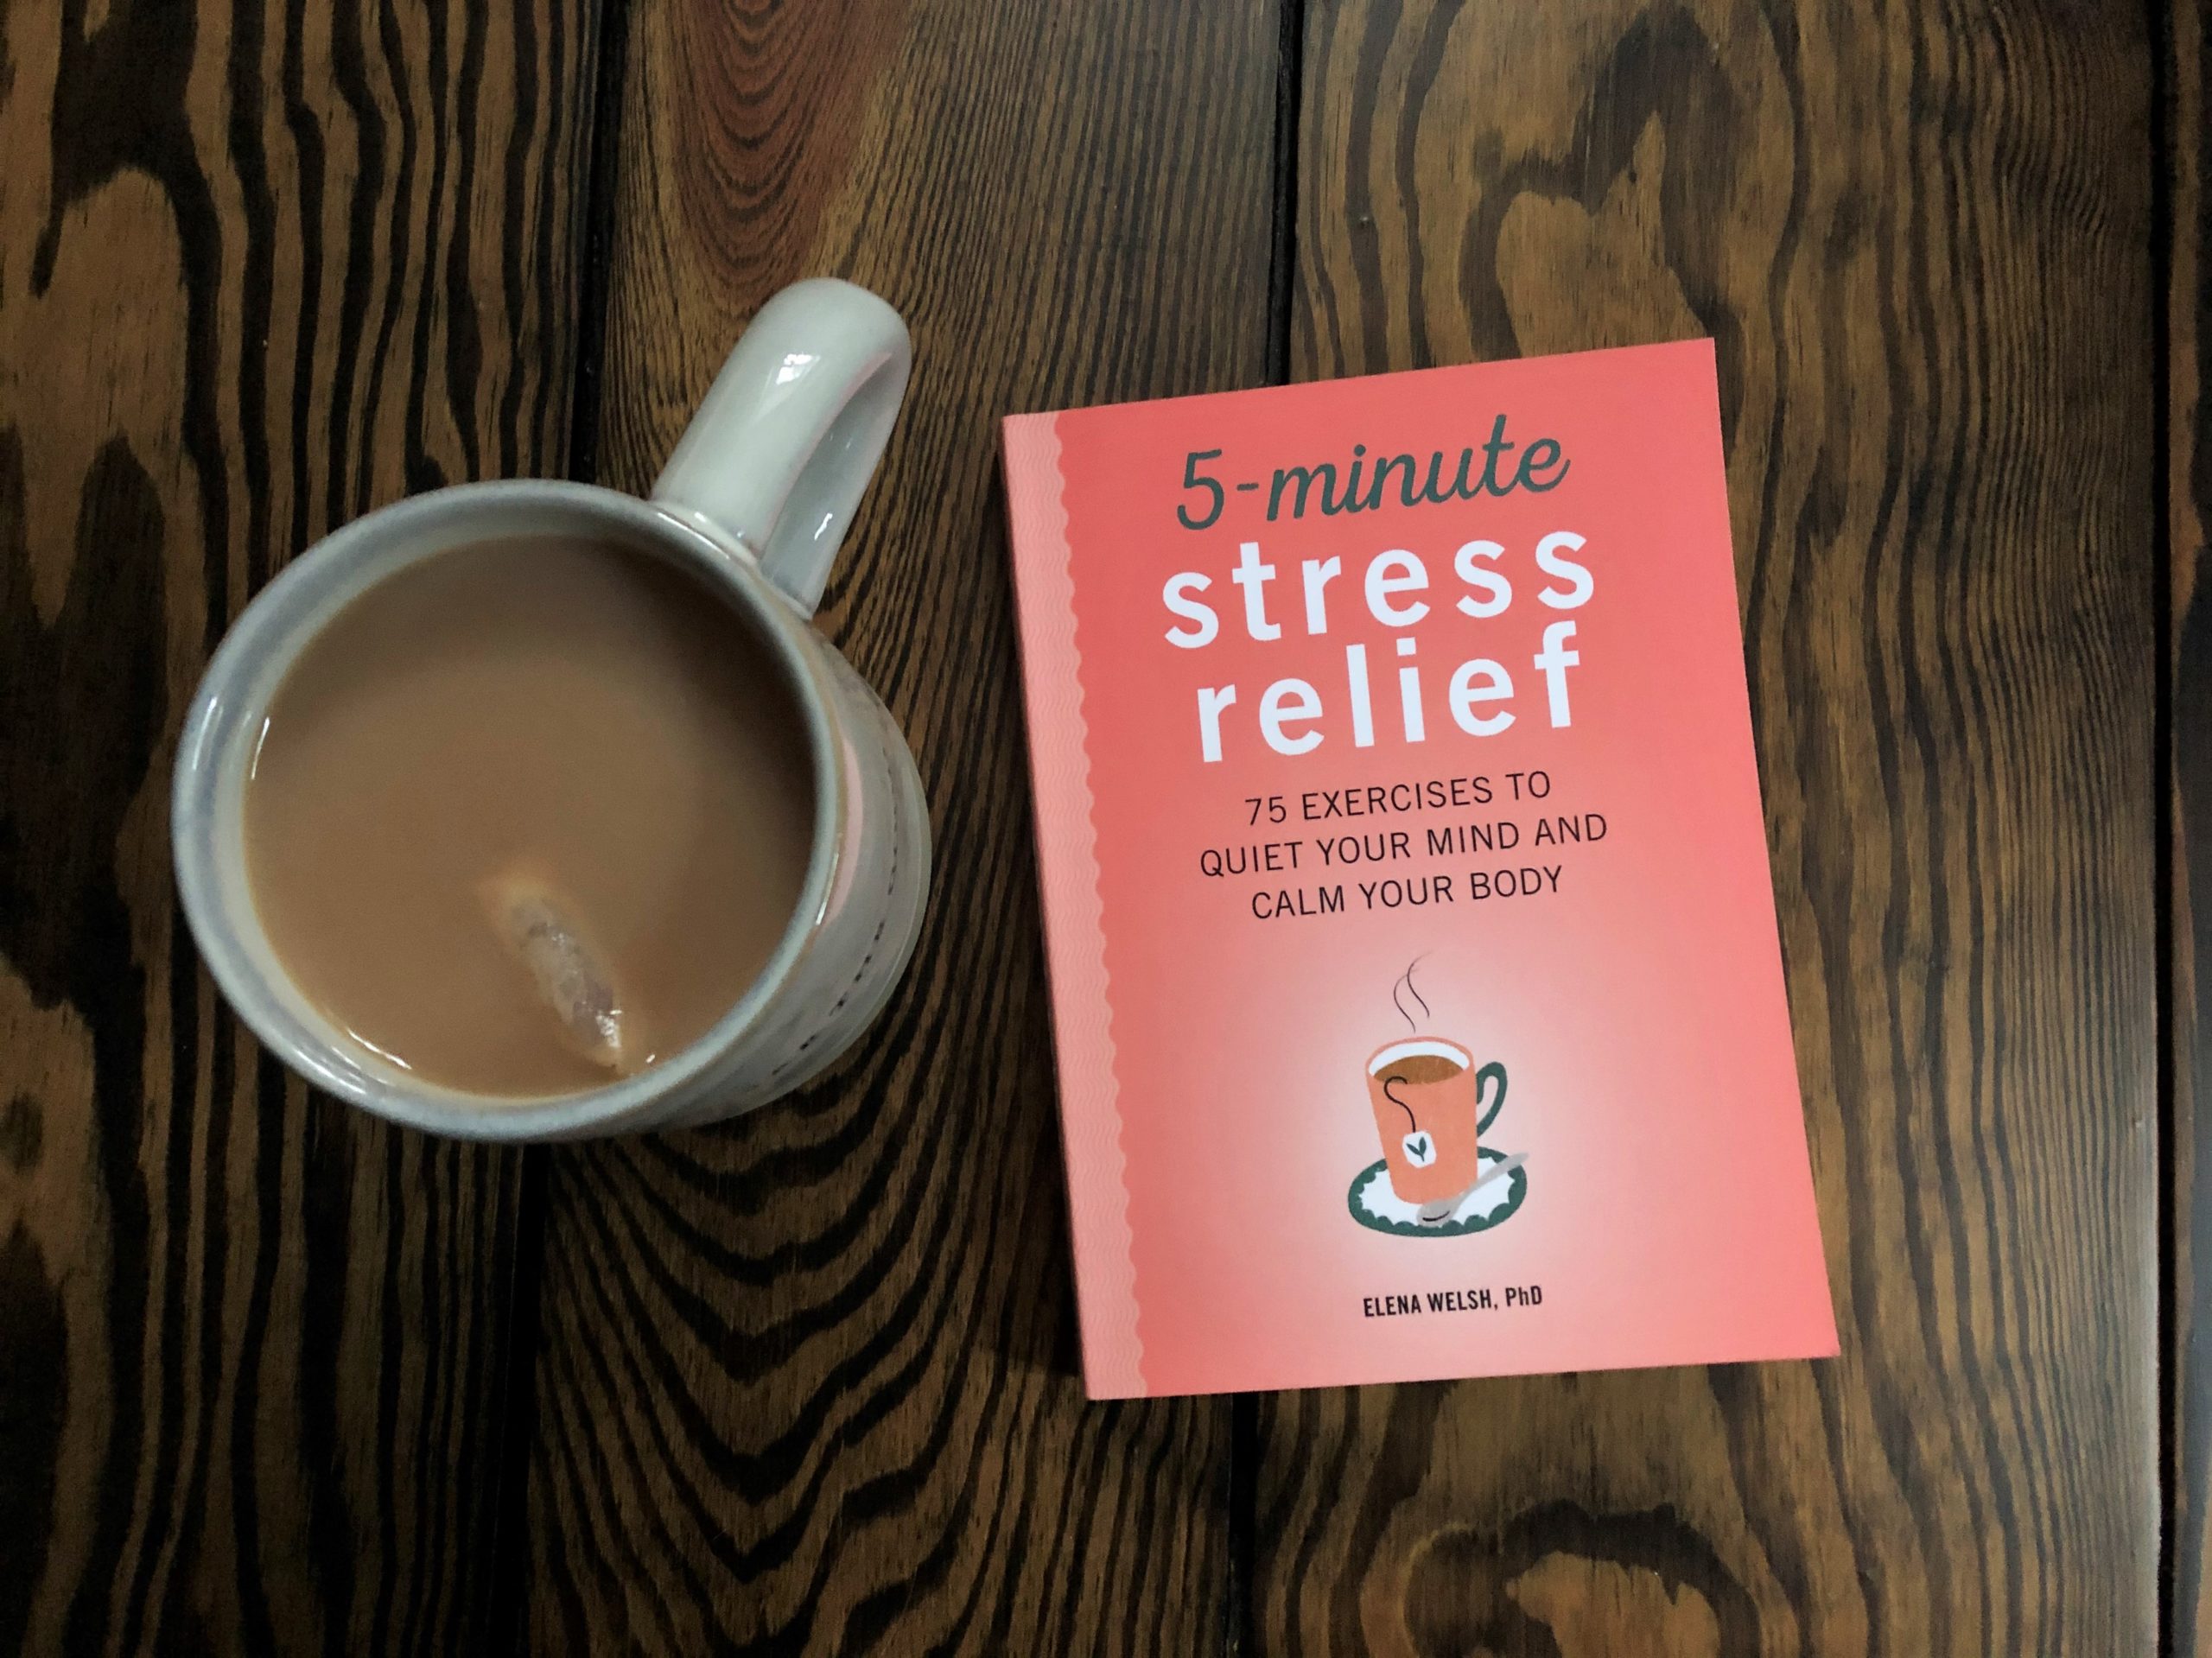 5-Minute Stress Relief by Elena Welsh PhD book photo